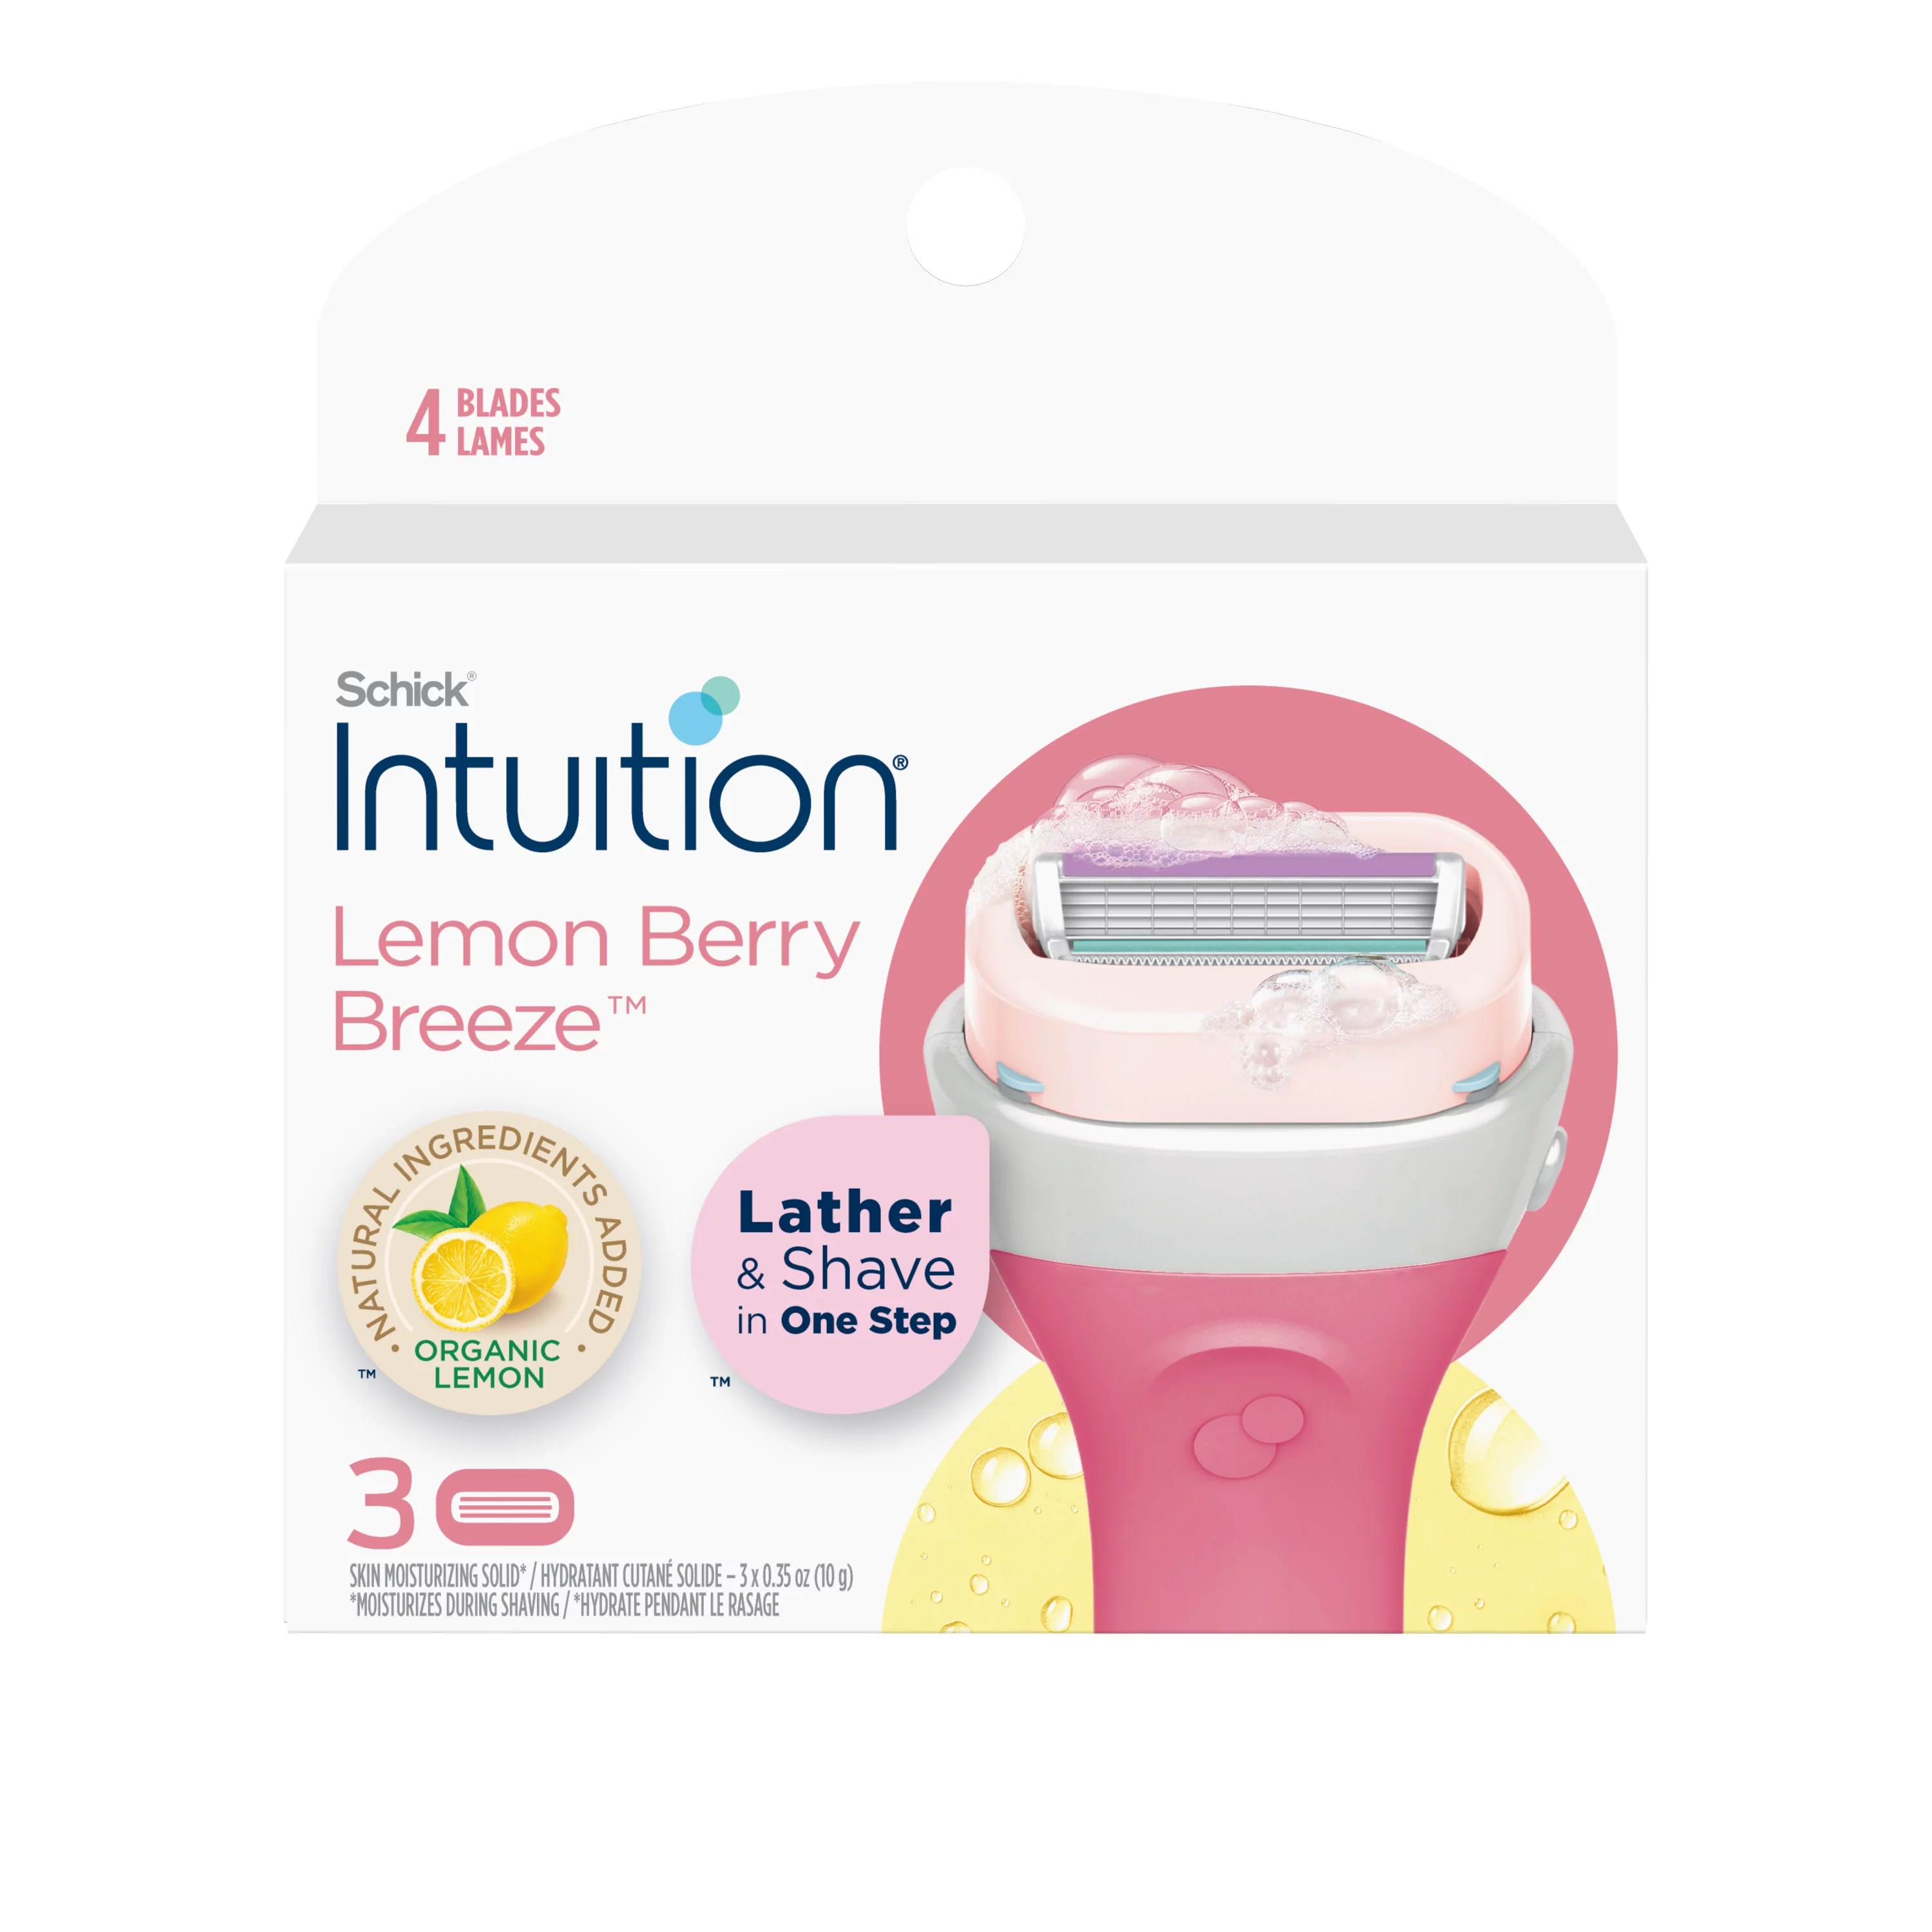 Schick Intuition 4-Blade Lemon Berry Breeze Razor Cartridge Refills, 3ct, Lather & Shave In One Step, With Organic Lemon